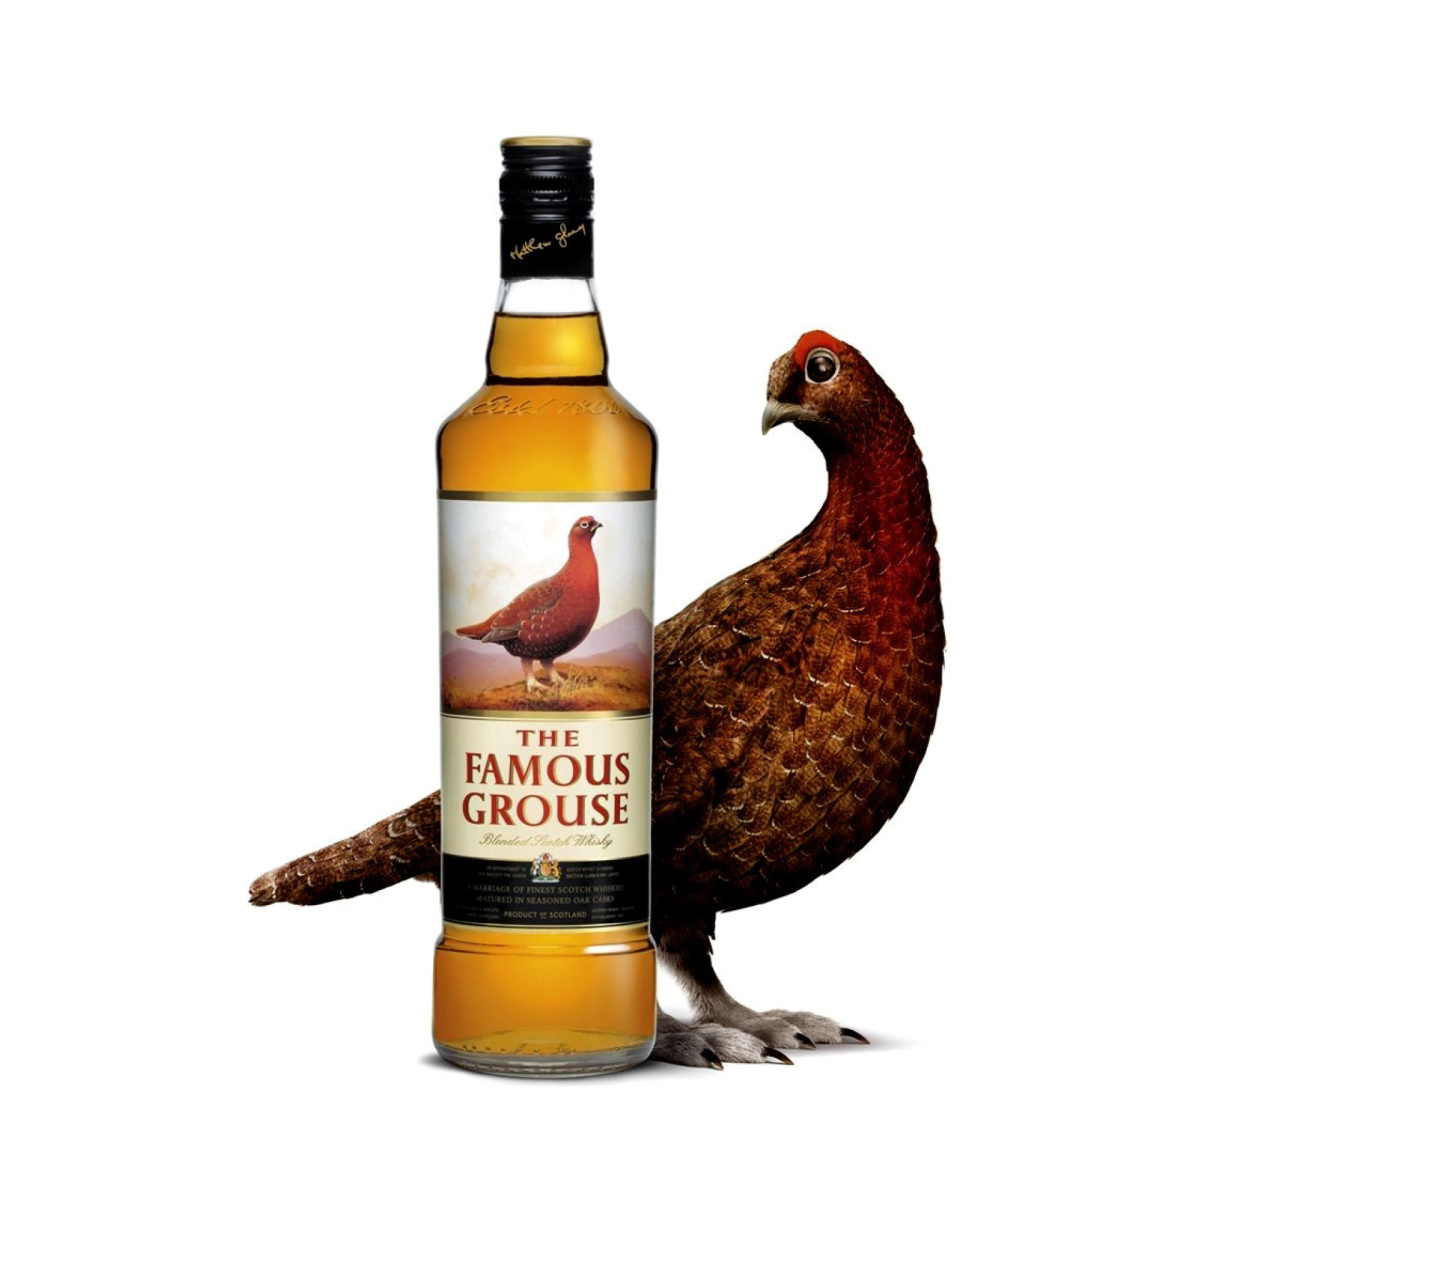 Das The Famous Grouse Scotch Whisky Wallpaper 1440x1280